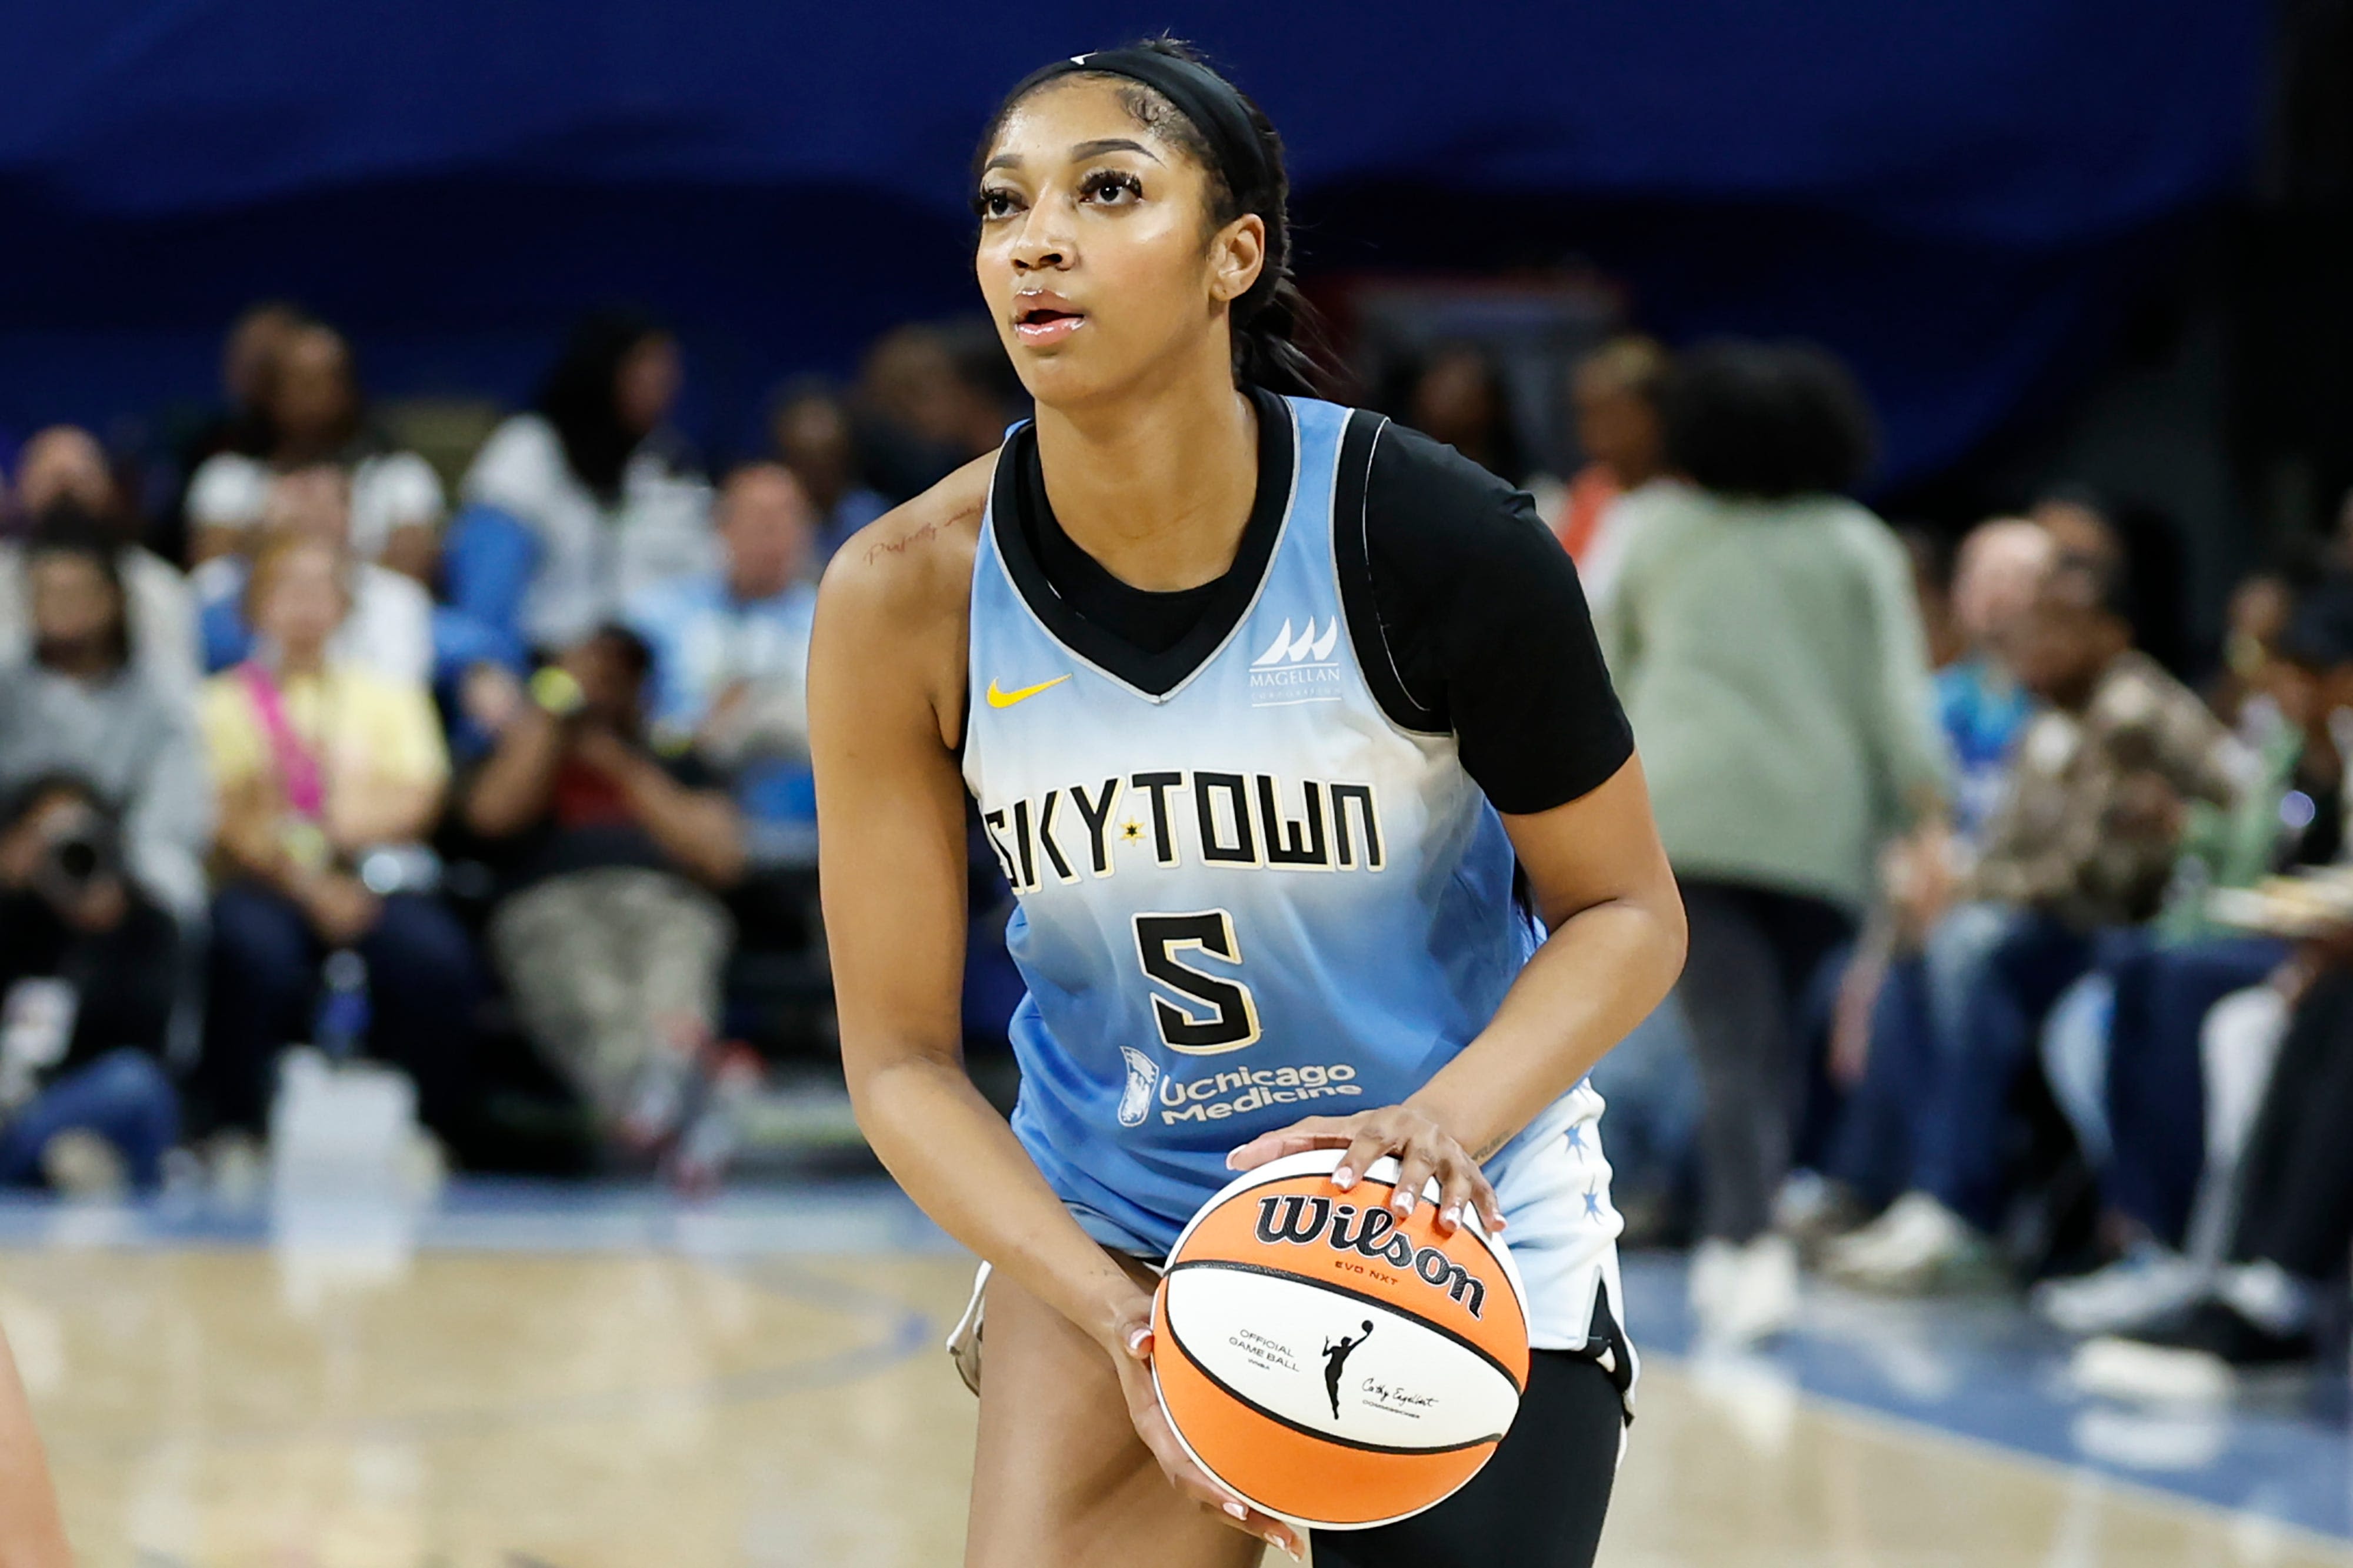 WNBA rookie power rankings: Caitlin Clark rises, Angel Reese owns the offensive glass